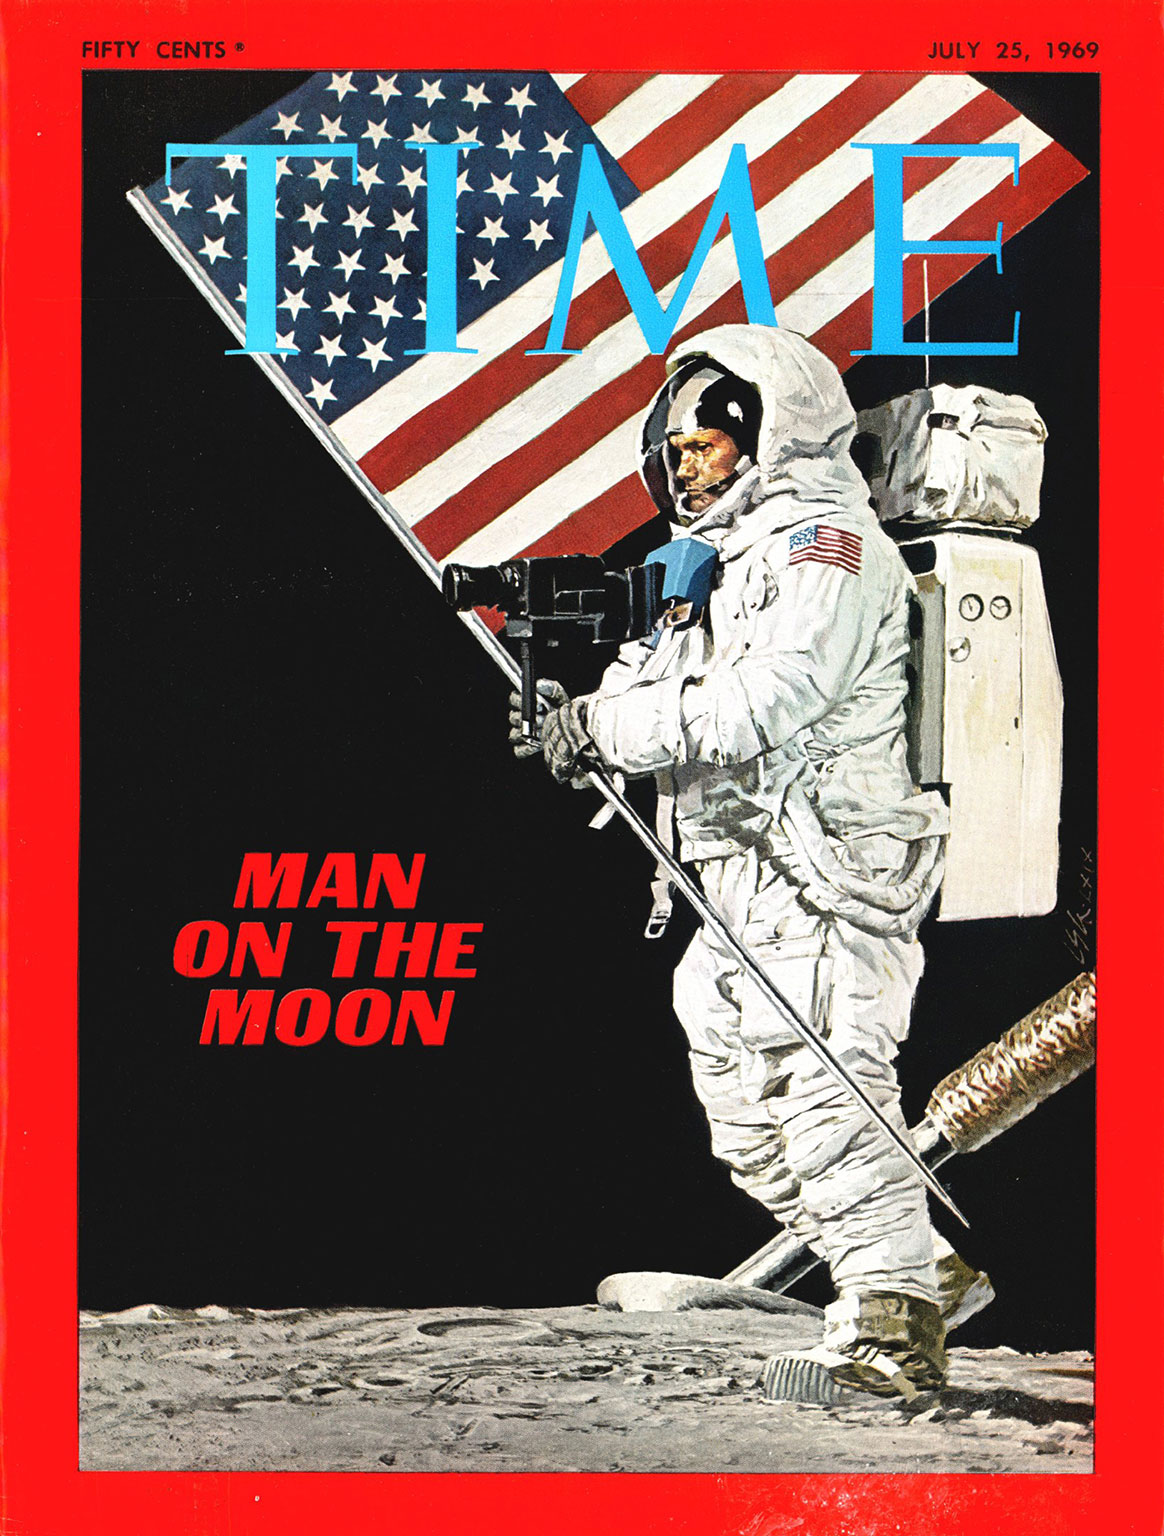 TIME Magazine Cover - Man on the Moon